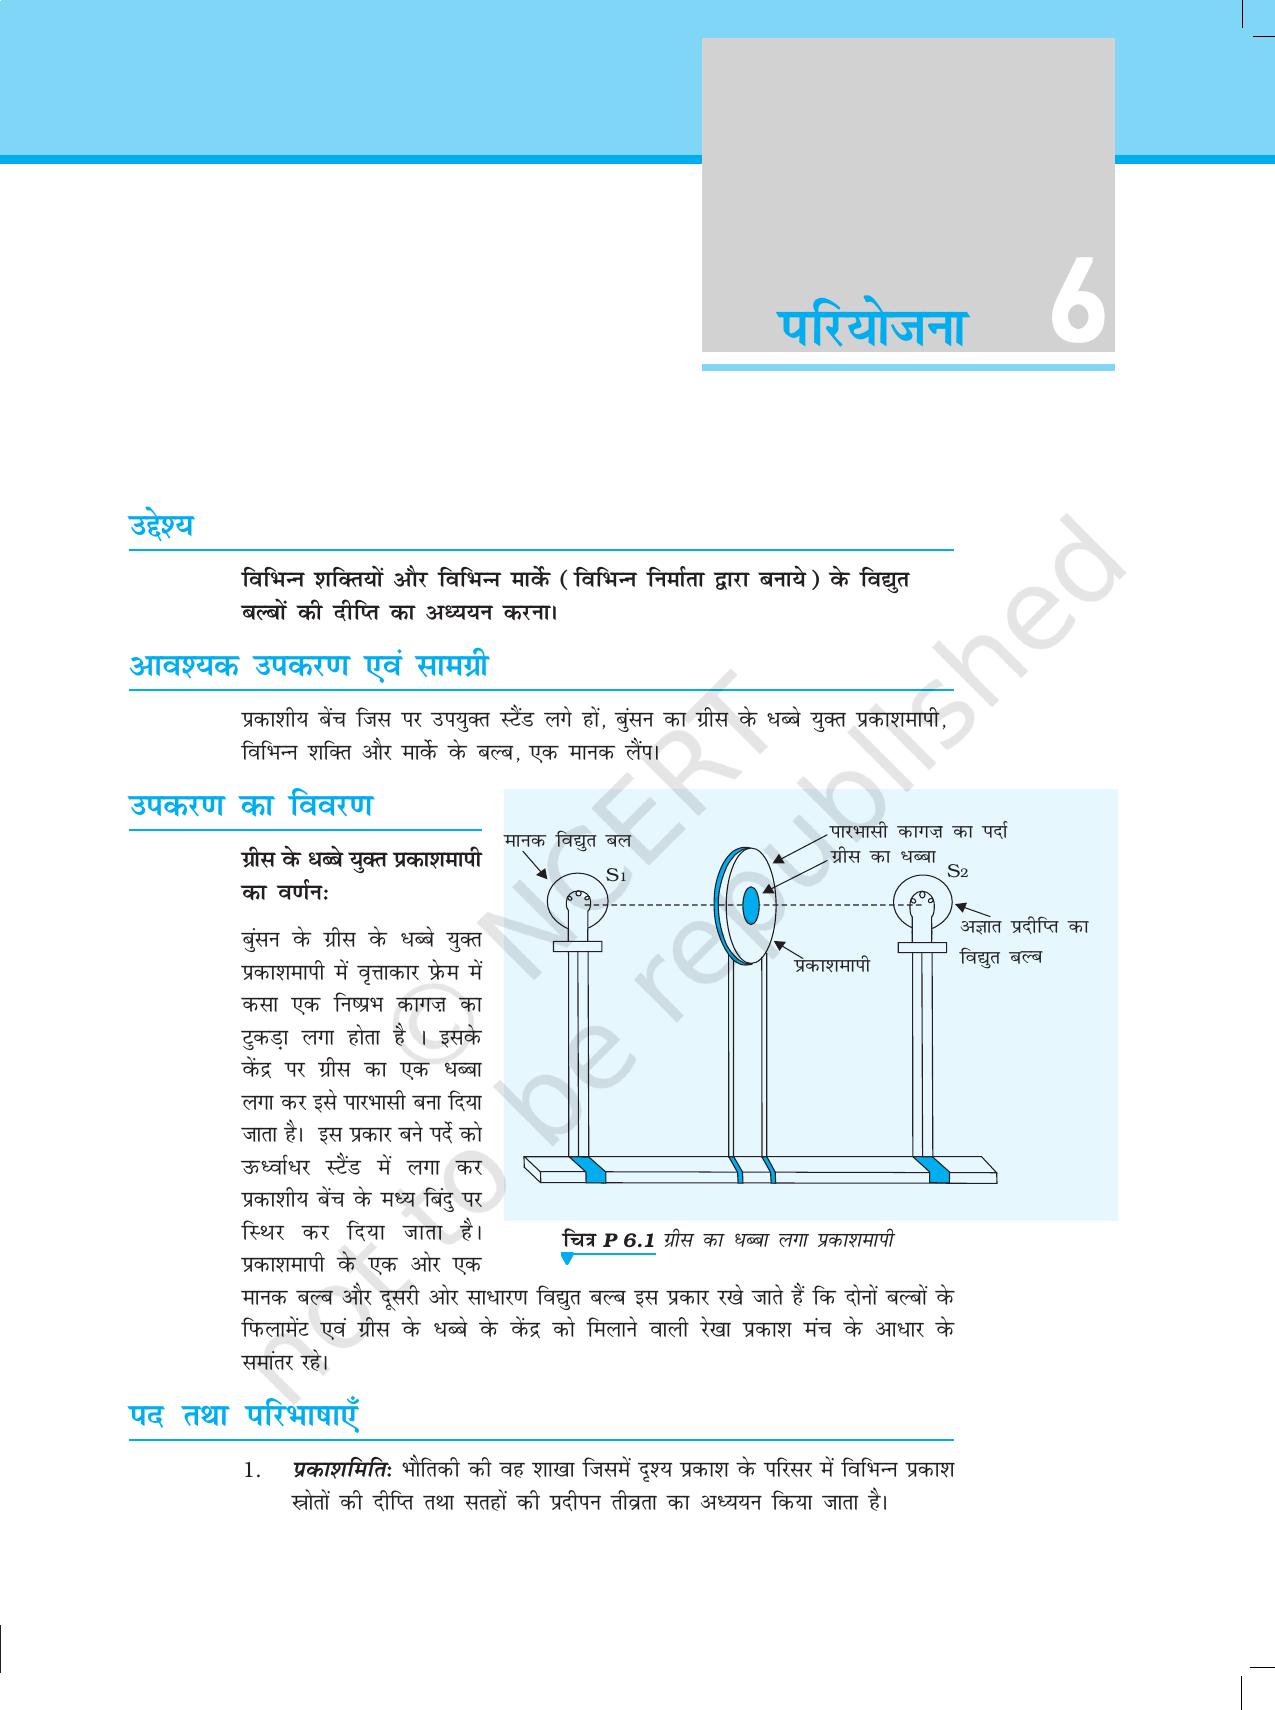 NCERT Laboratory Manuals for Class XII भौतिकी - परियोजना (1 - 7) - Page 21